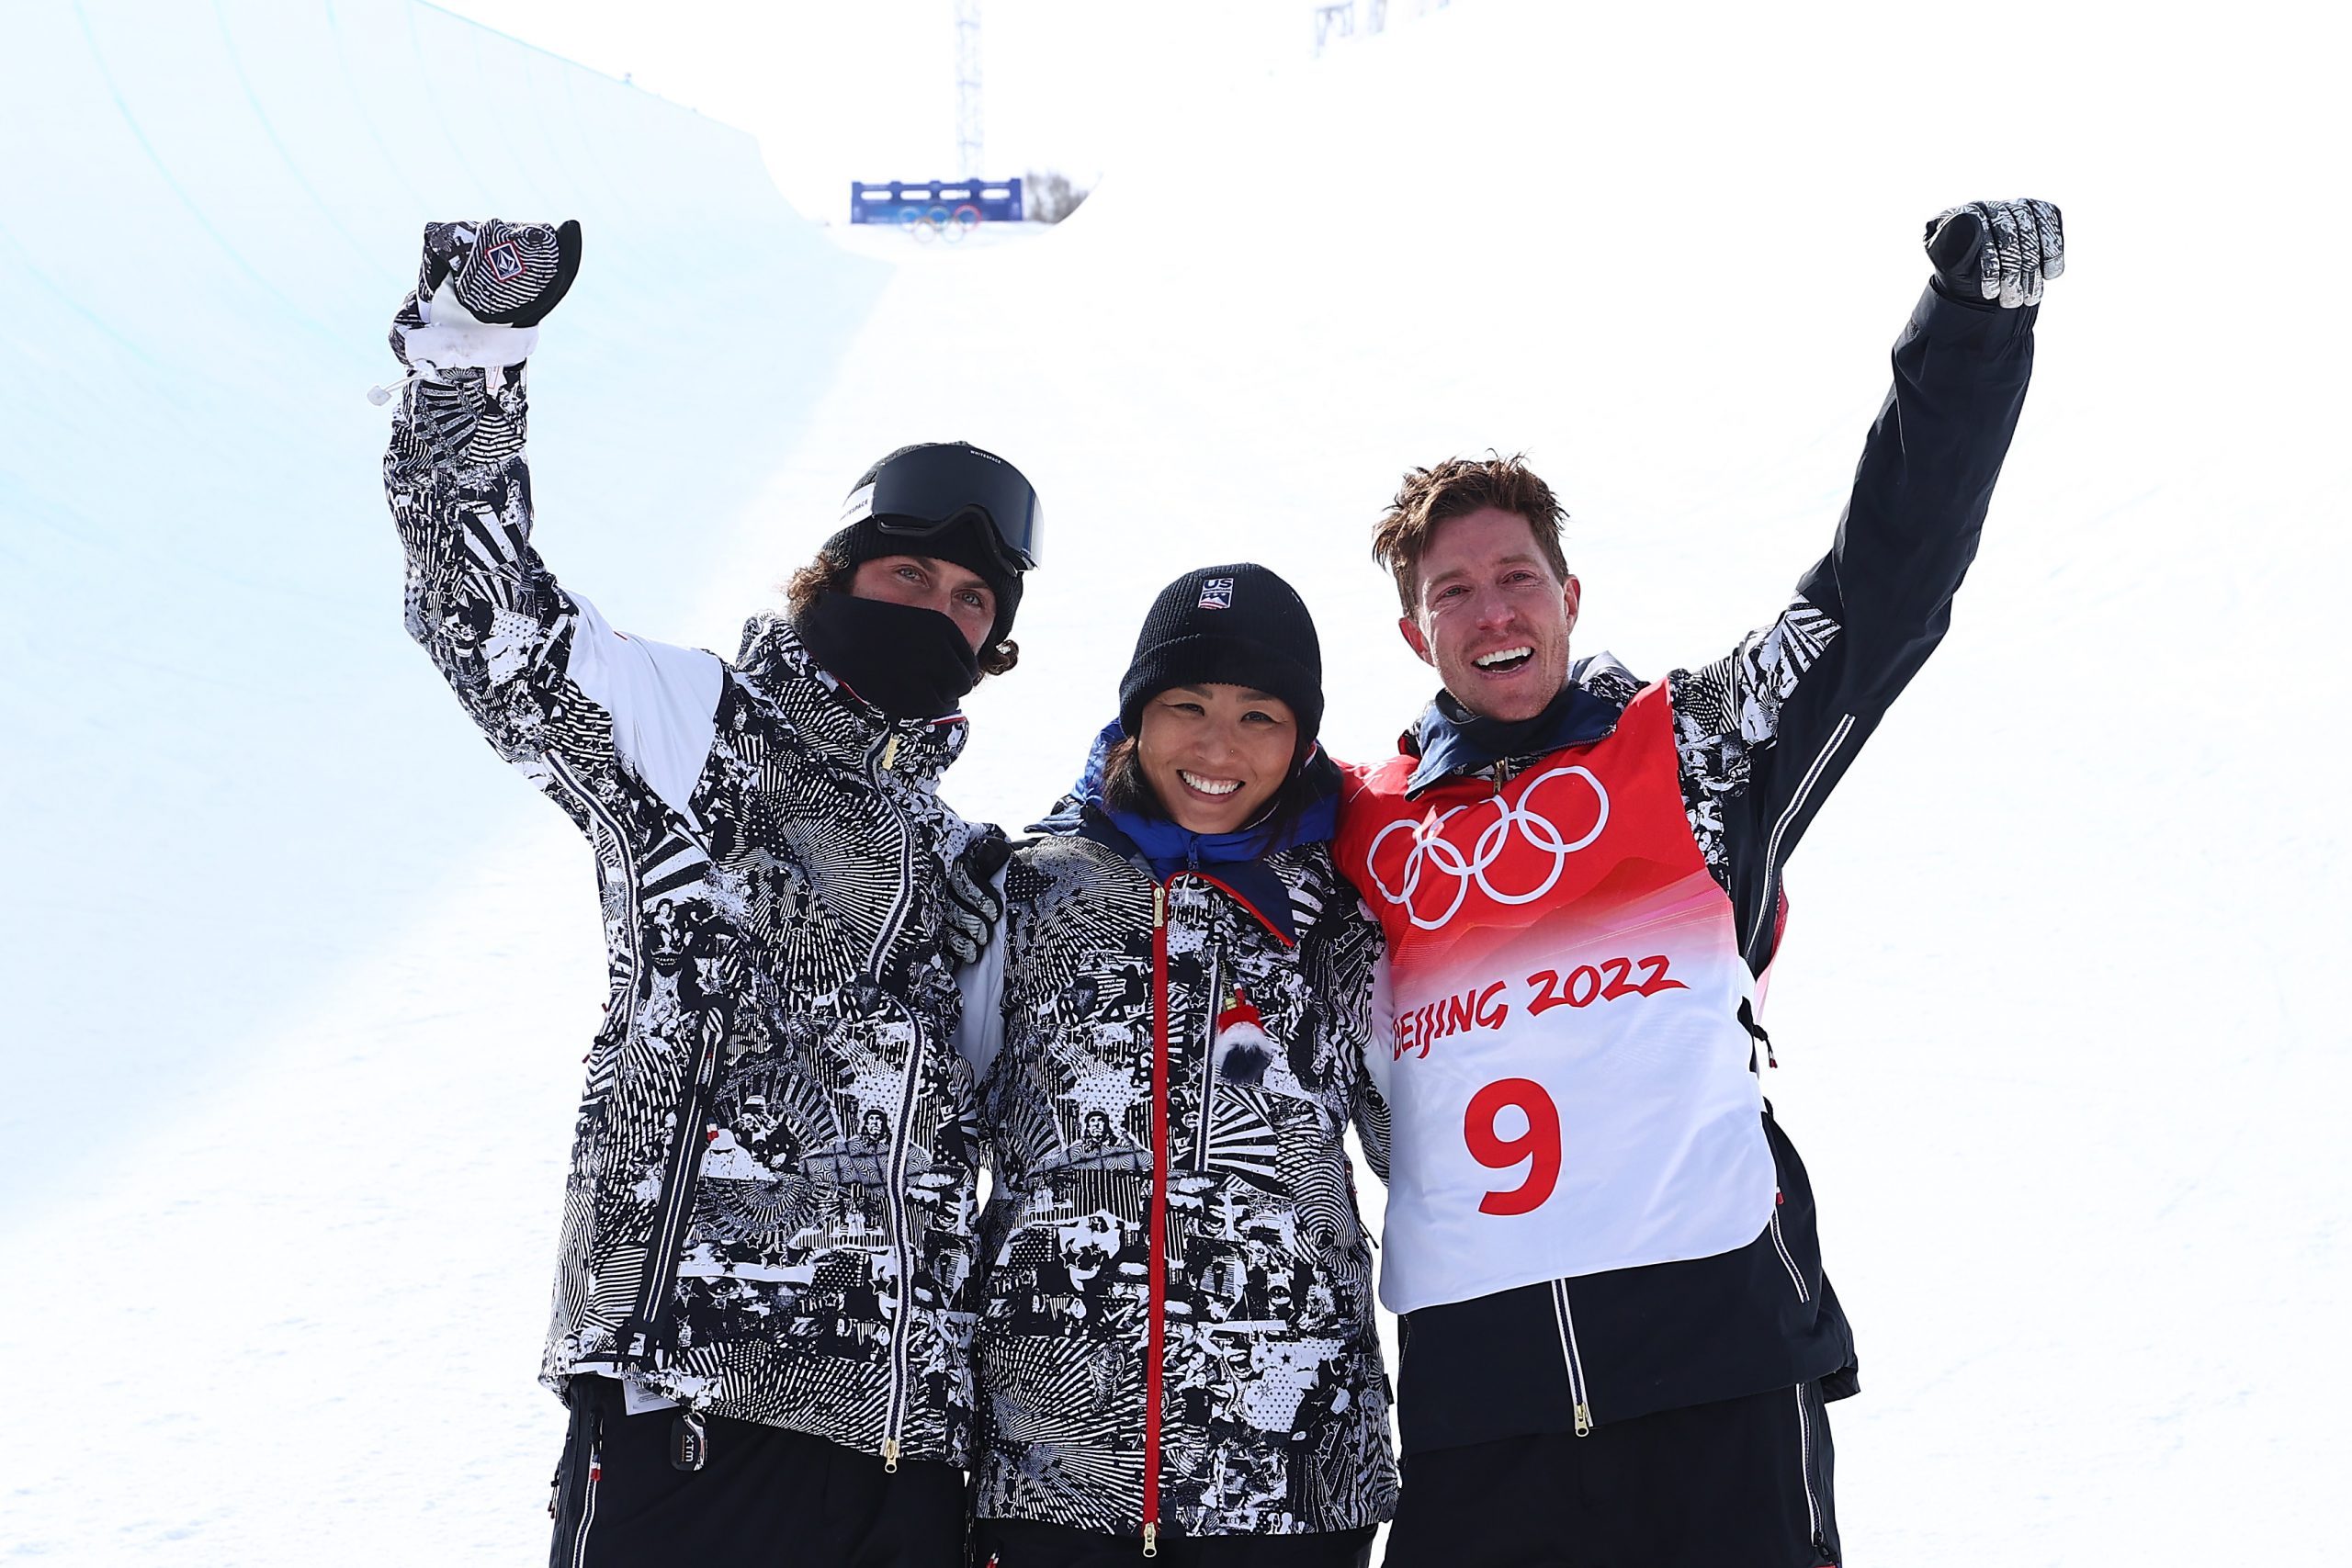 Snowboarder Shaun White to retire after Beijing Olympics